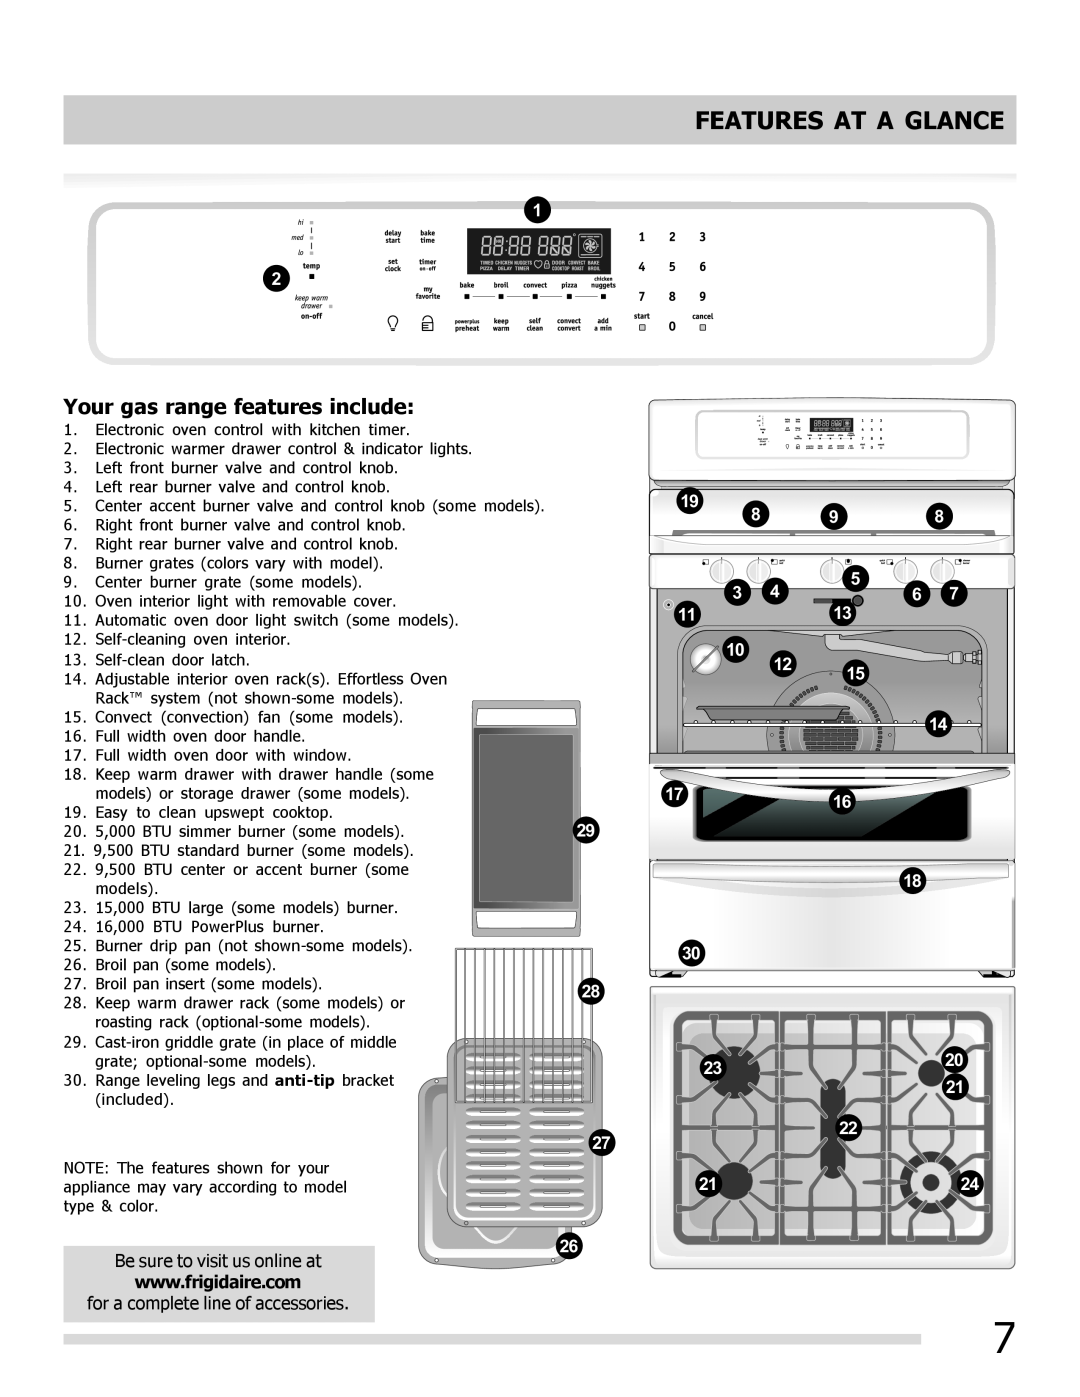 Frigidaire 316901202, DGGF3042KF-PKG manual Features At A Glance, Your gas range features include 